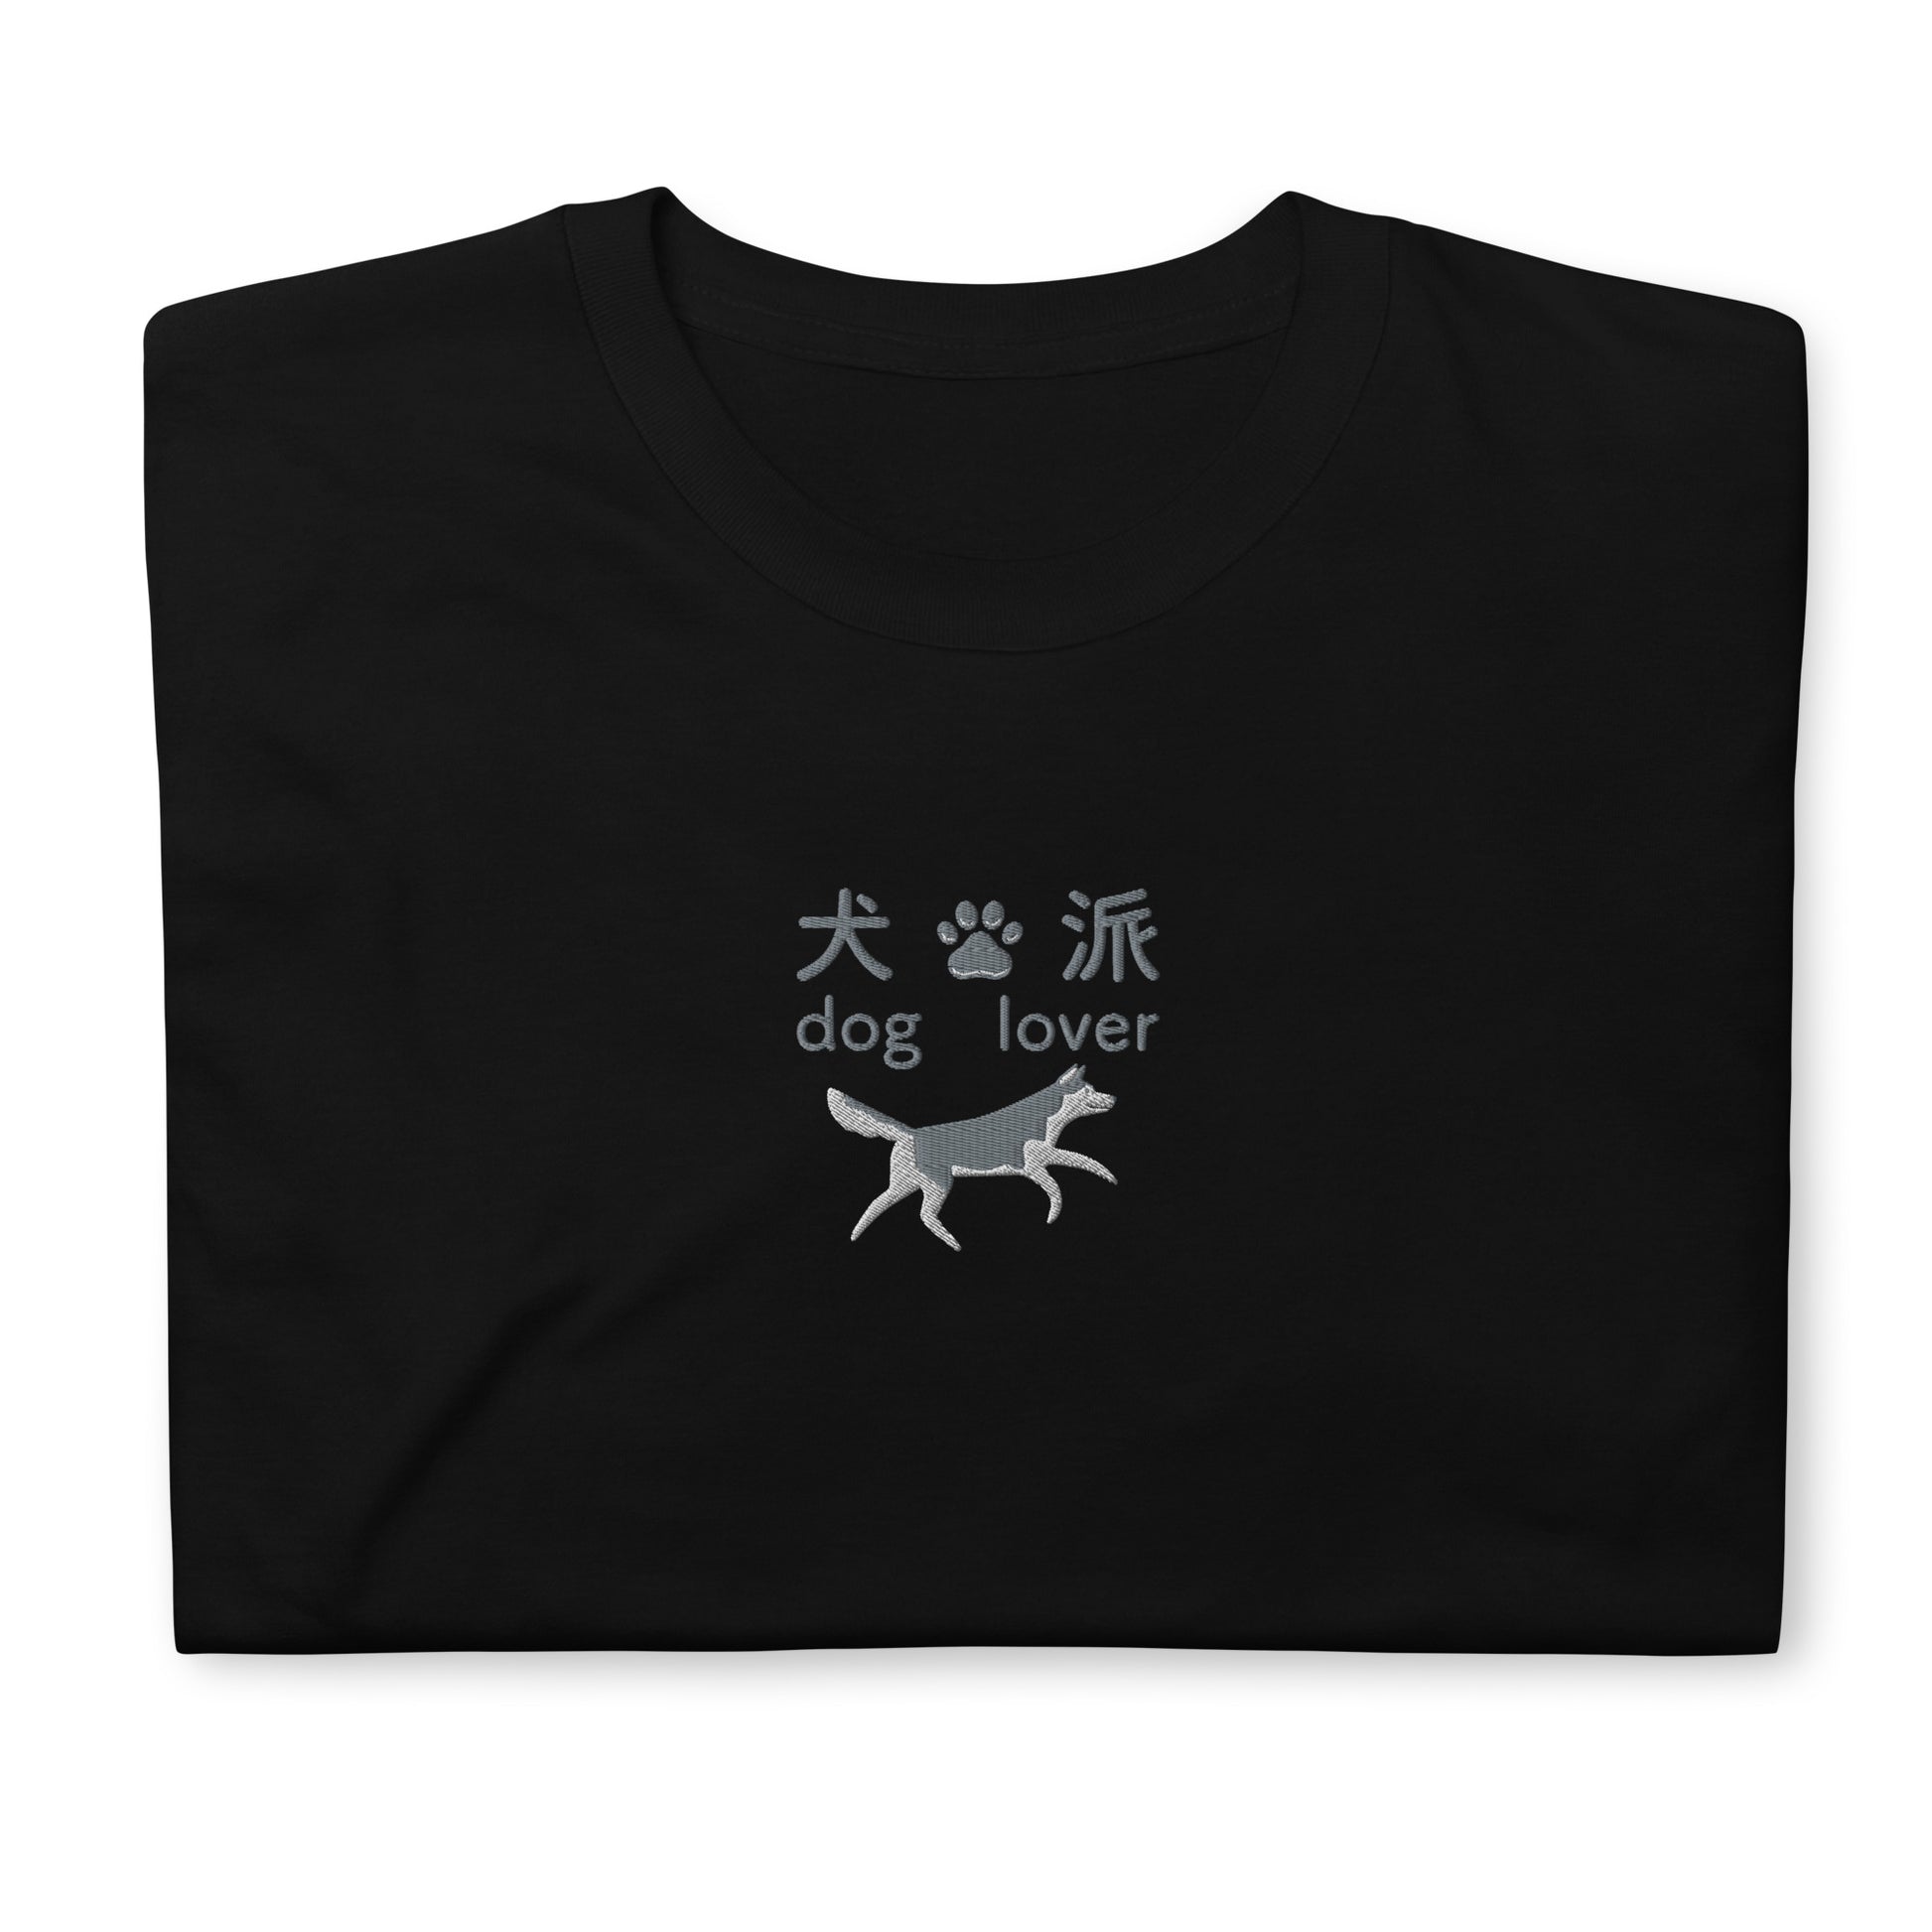 Black High Quality Tee - Front Design with an Gray, White Embroidery "Dog Lover" in Japanese,Chinese and English, and Dog Embroidery